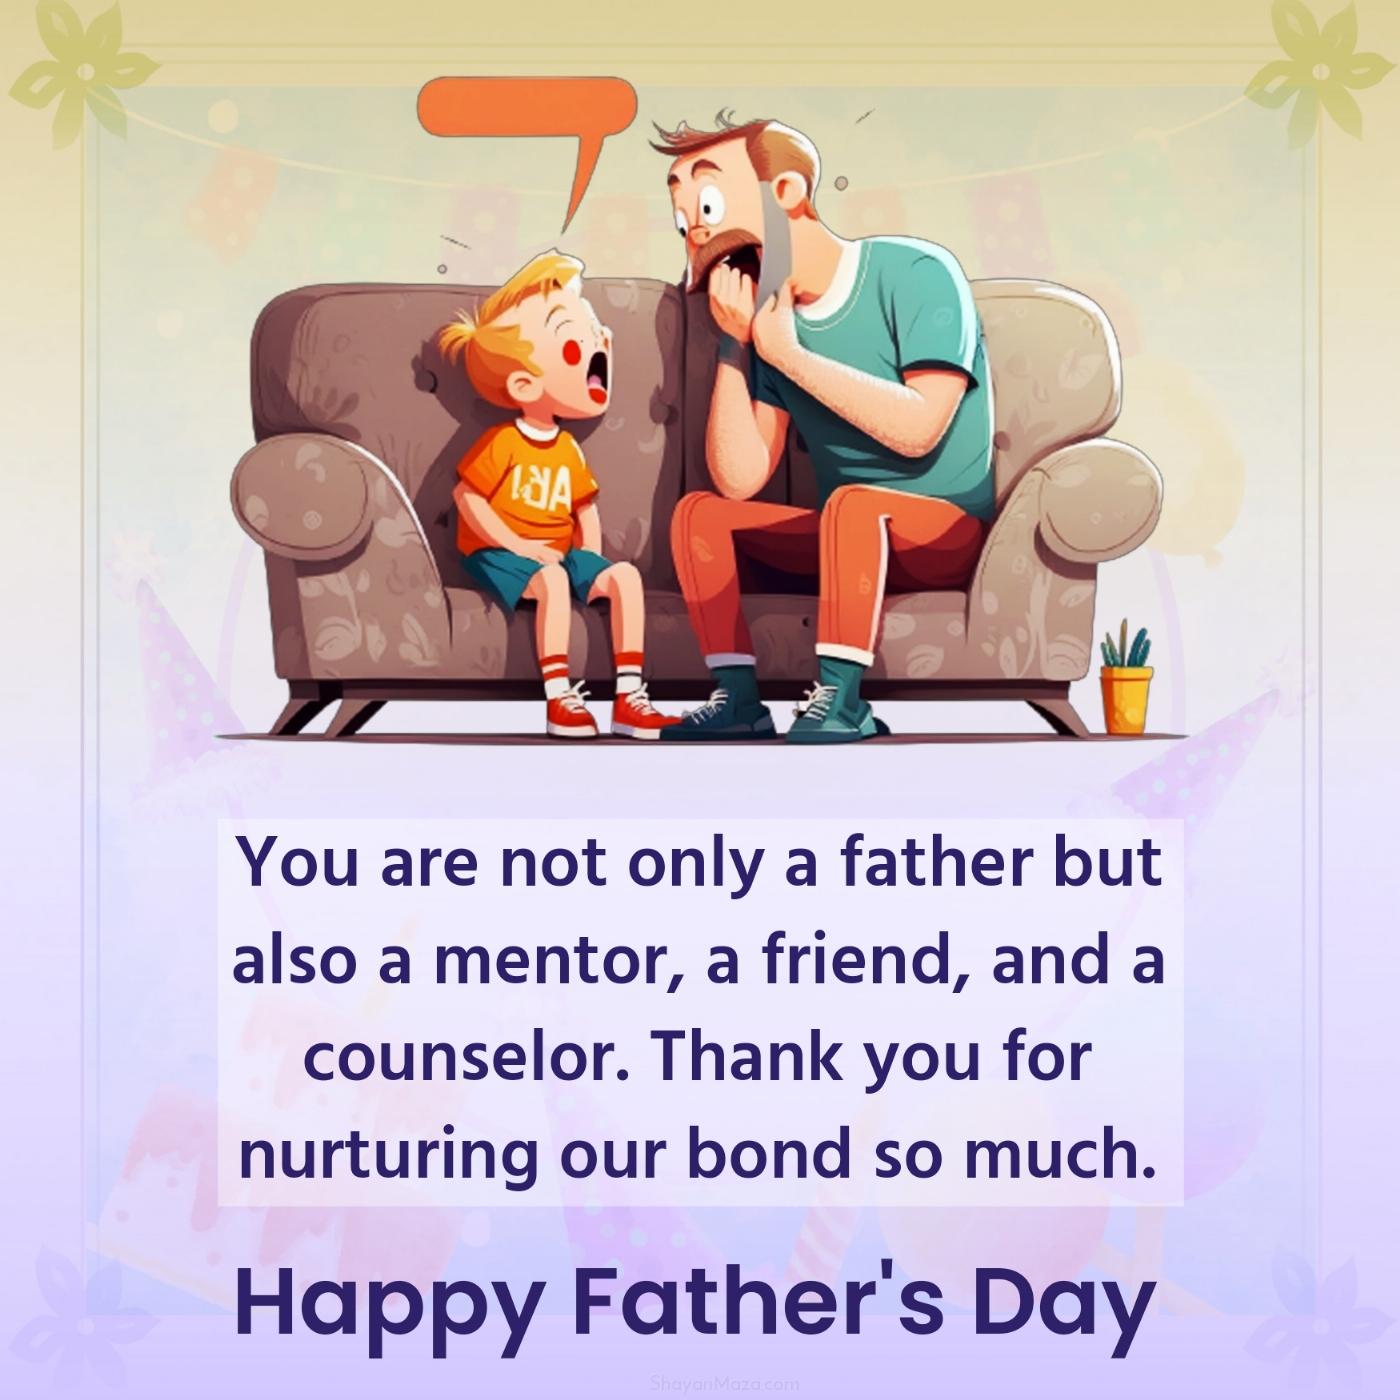 You are not only a father but also a mentor a friend